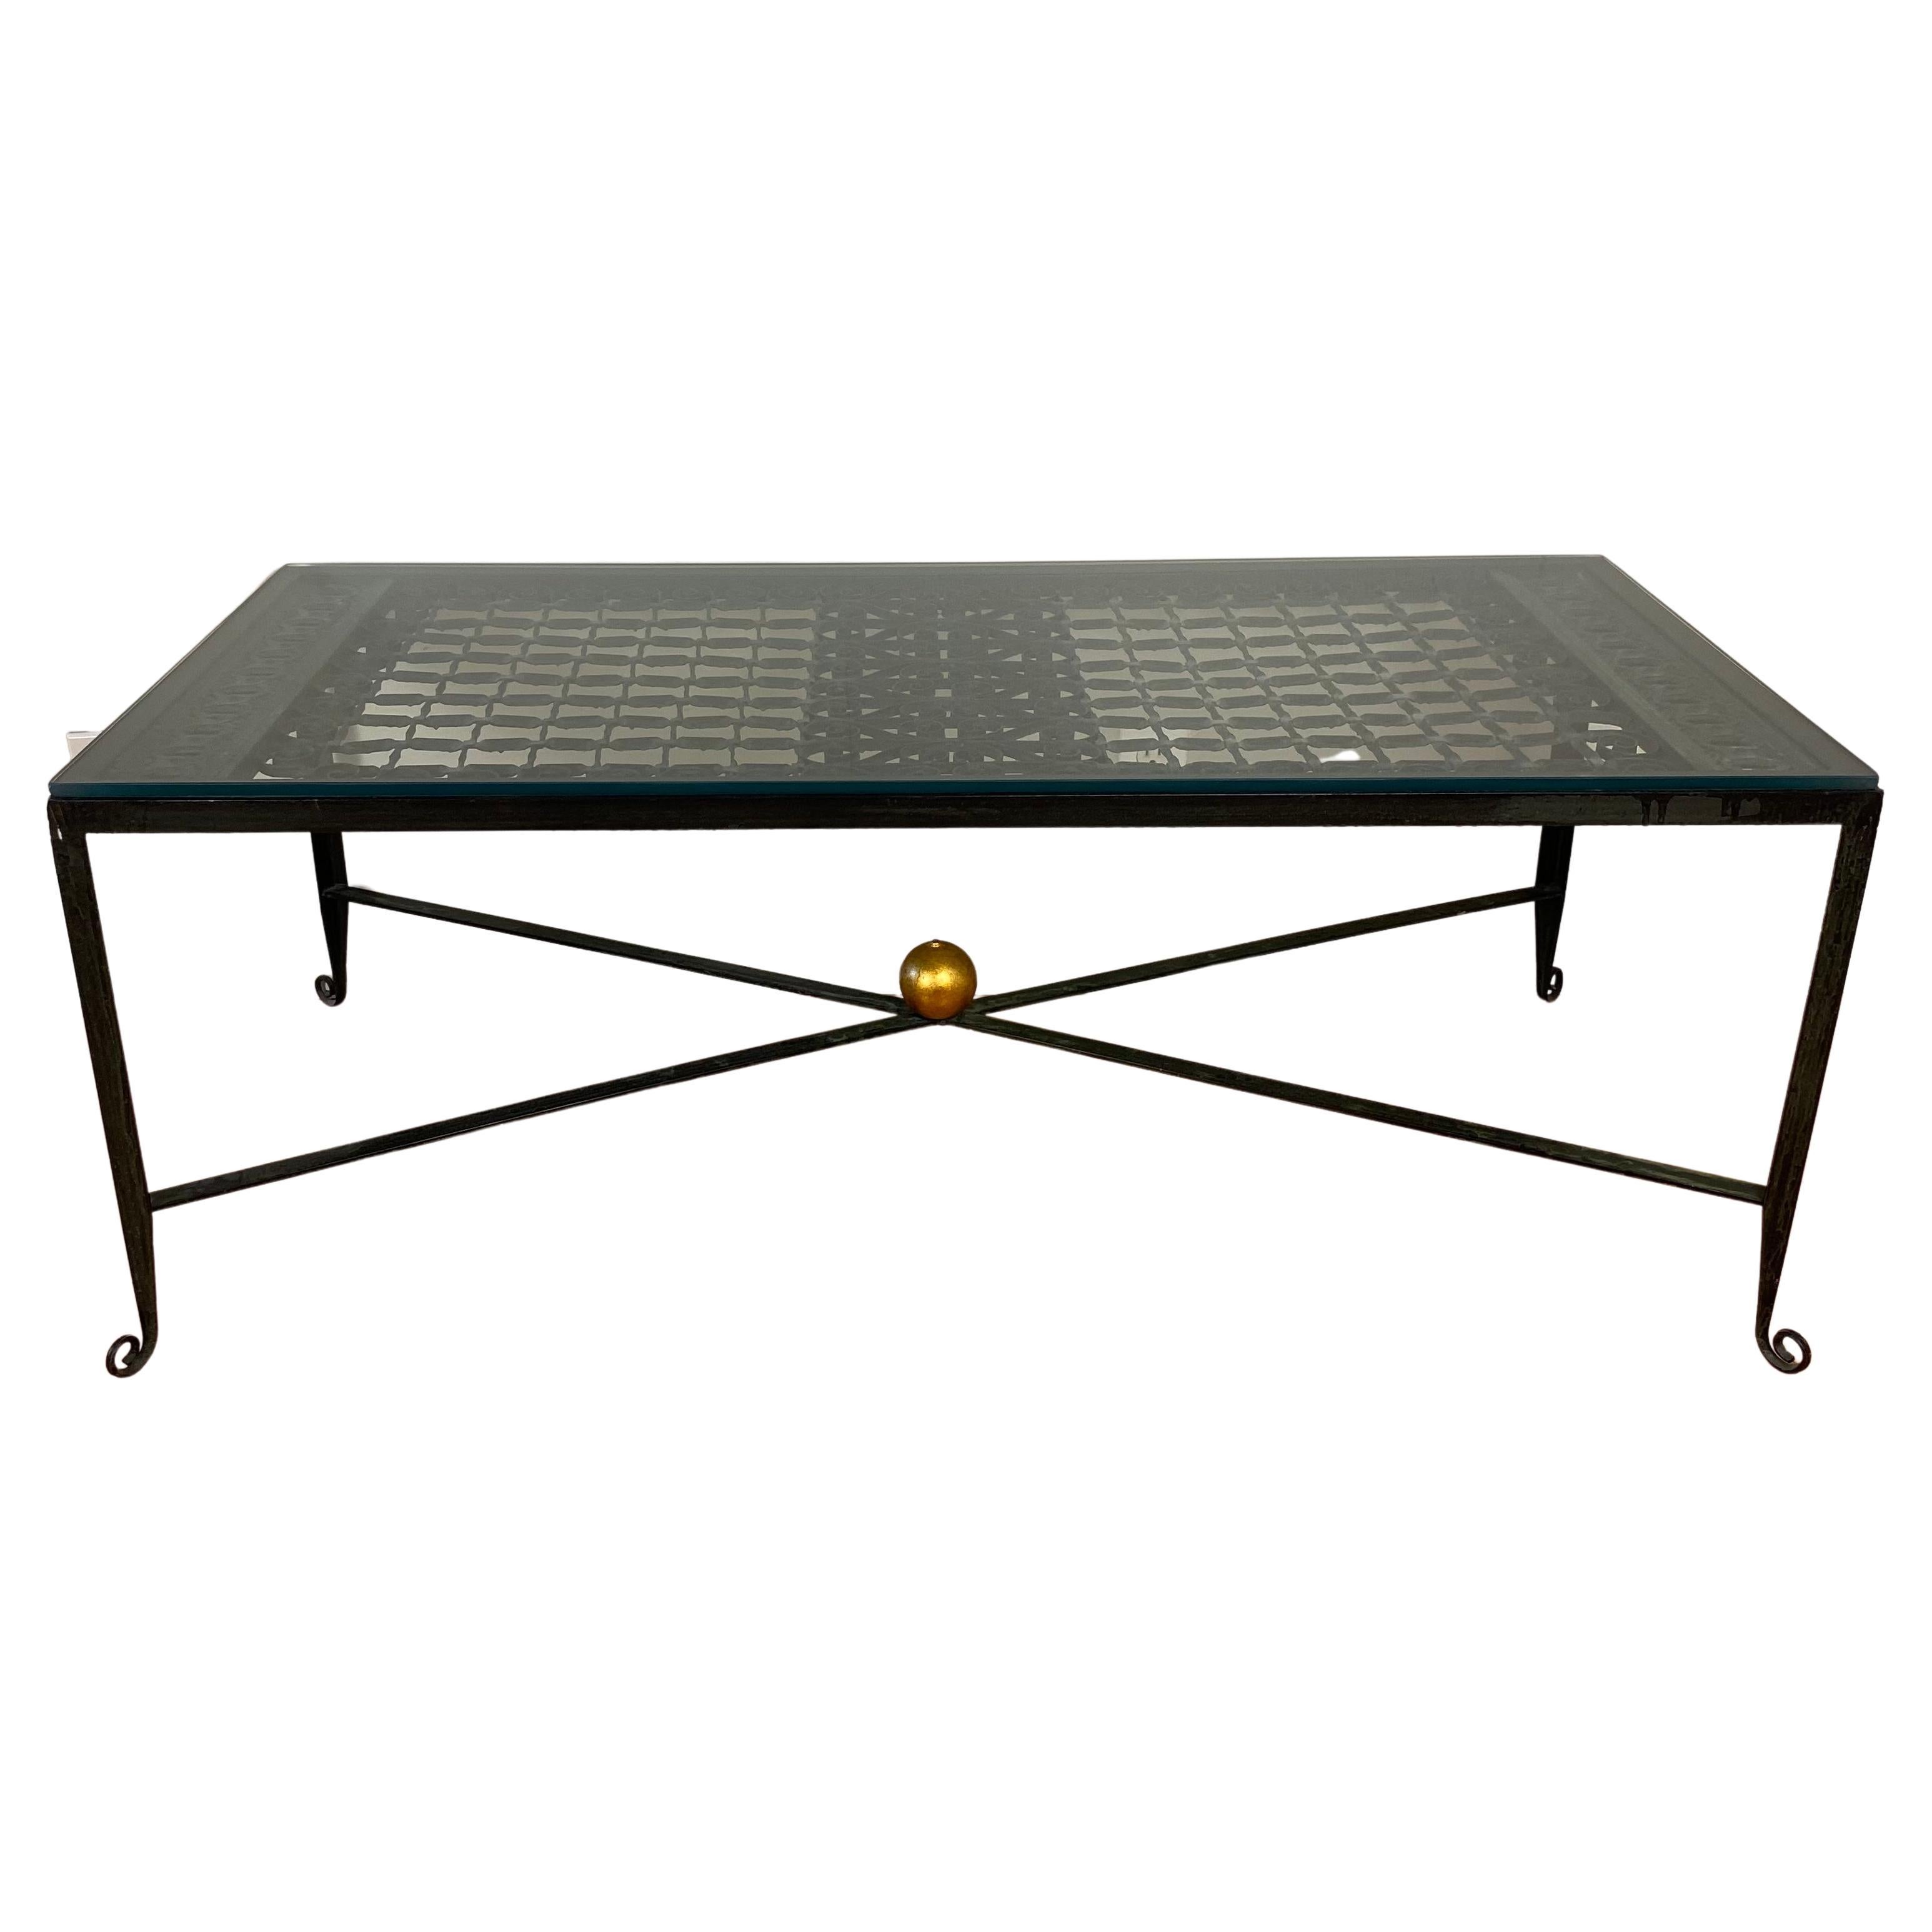 Decorative Wrought Iron Cocktail Coffee Table, Architectural Element Glass Top For Sale